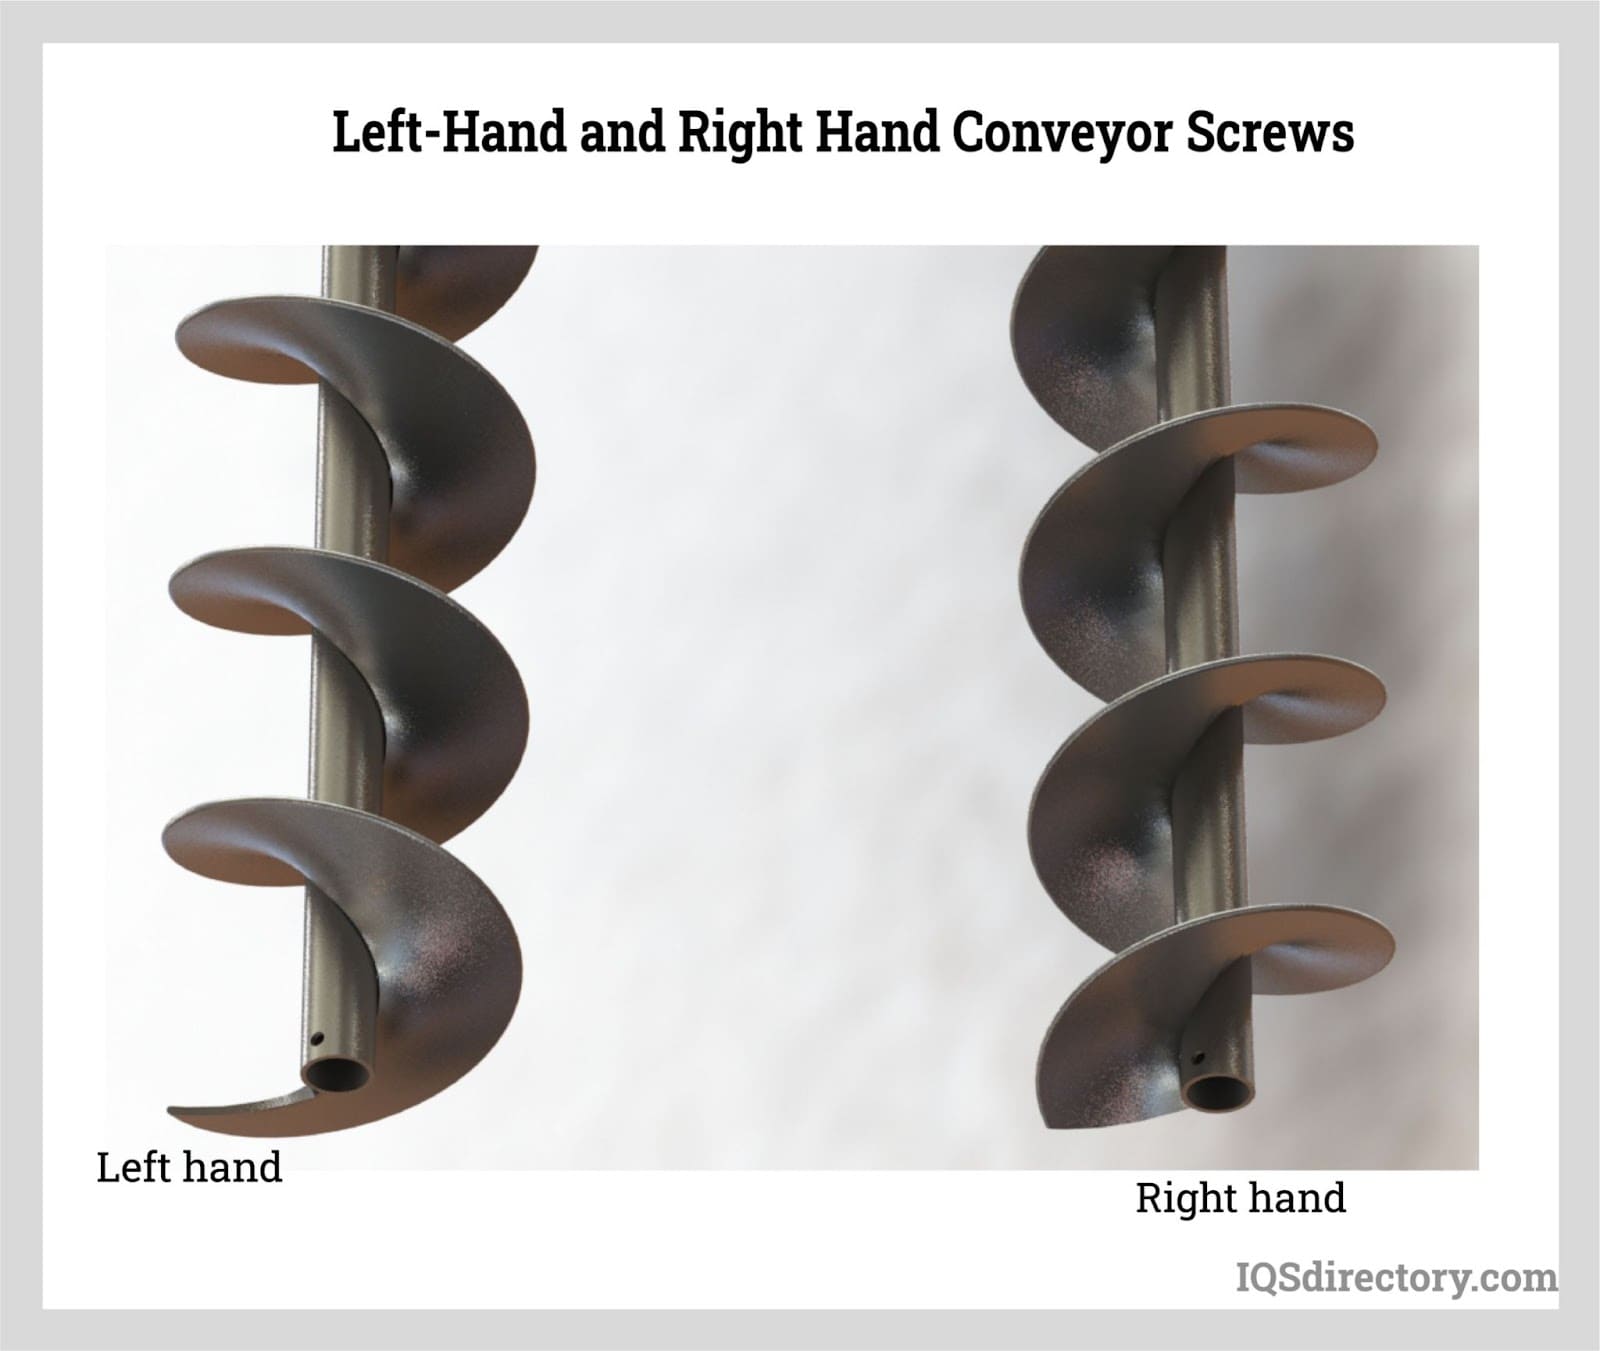 Left-Hand and Right Hand Conveyor Screws